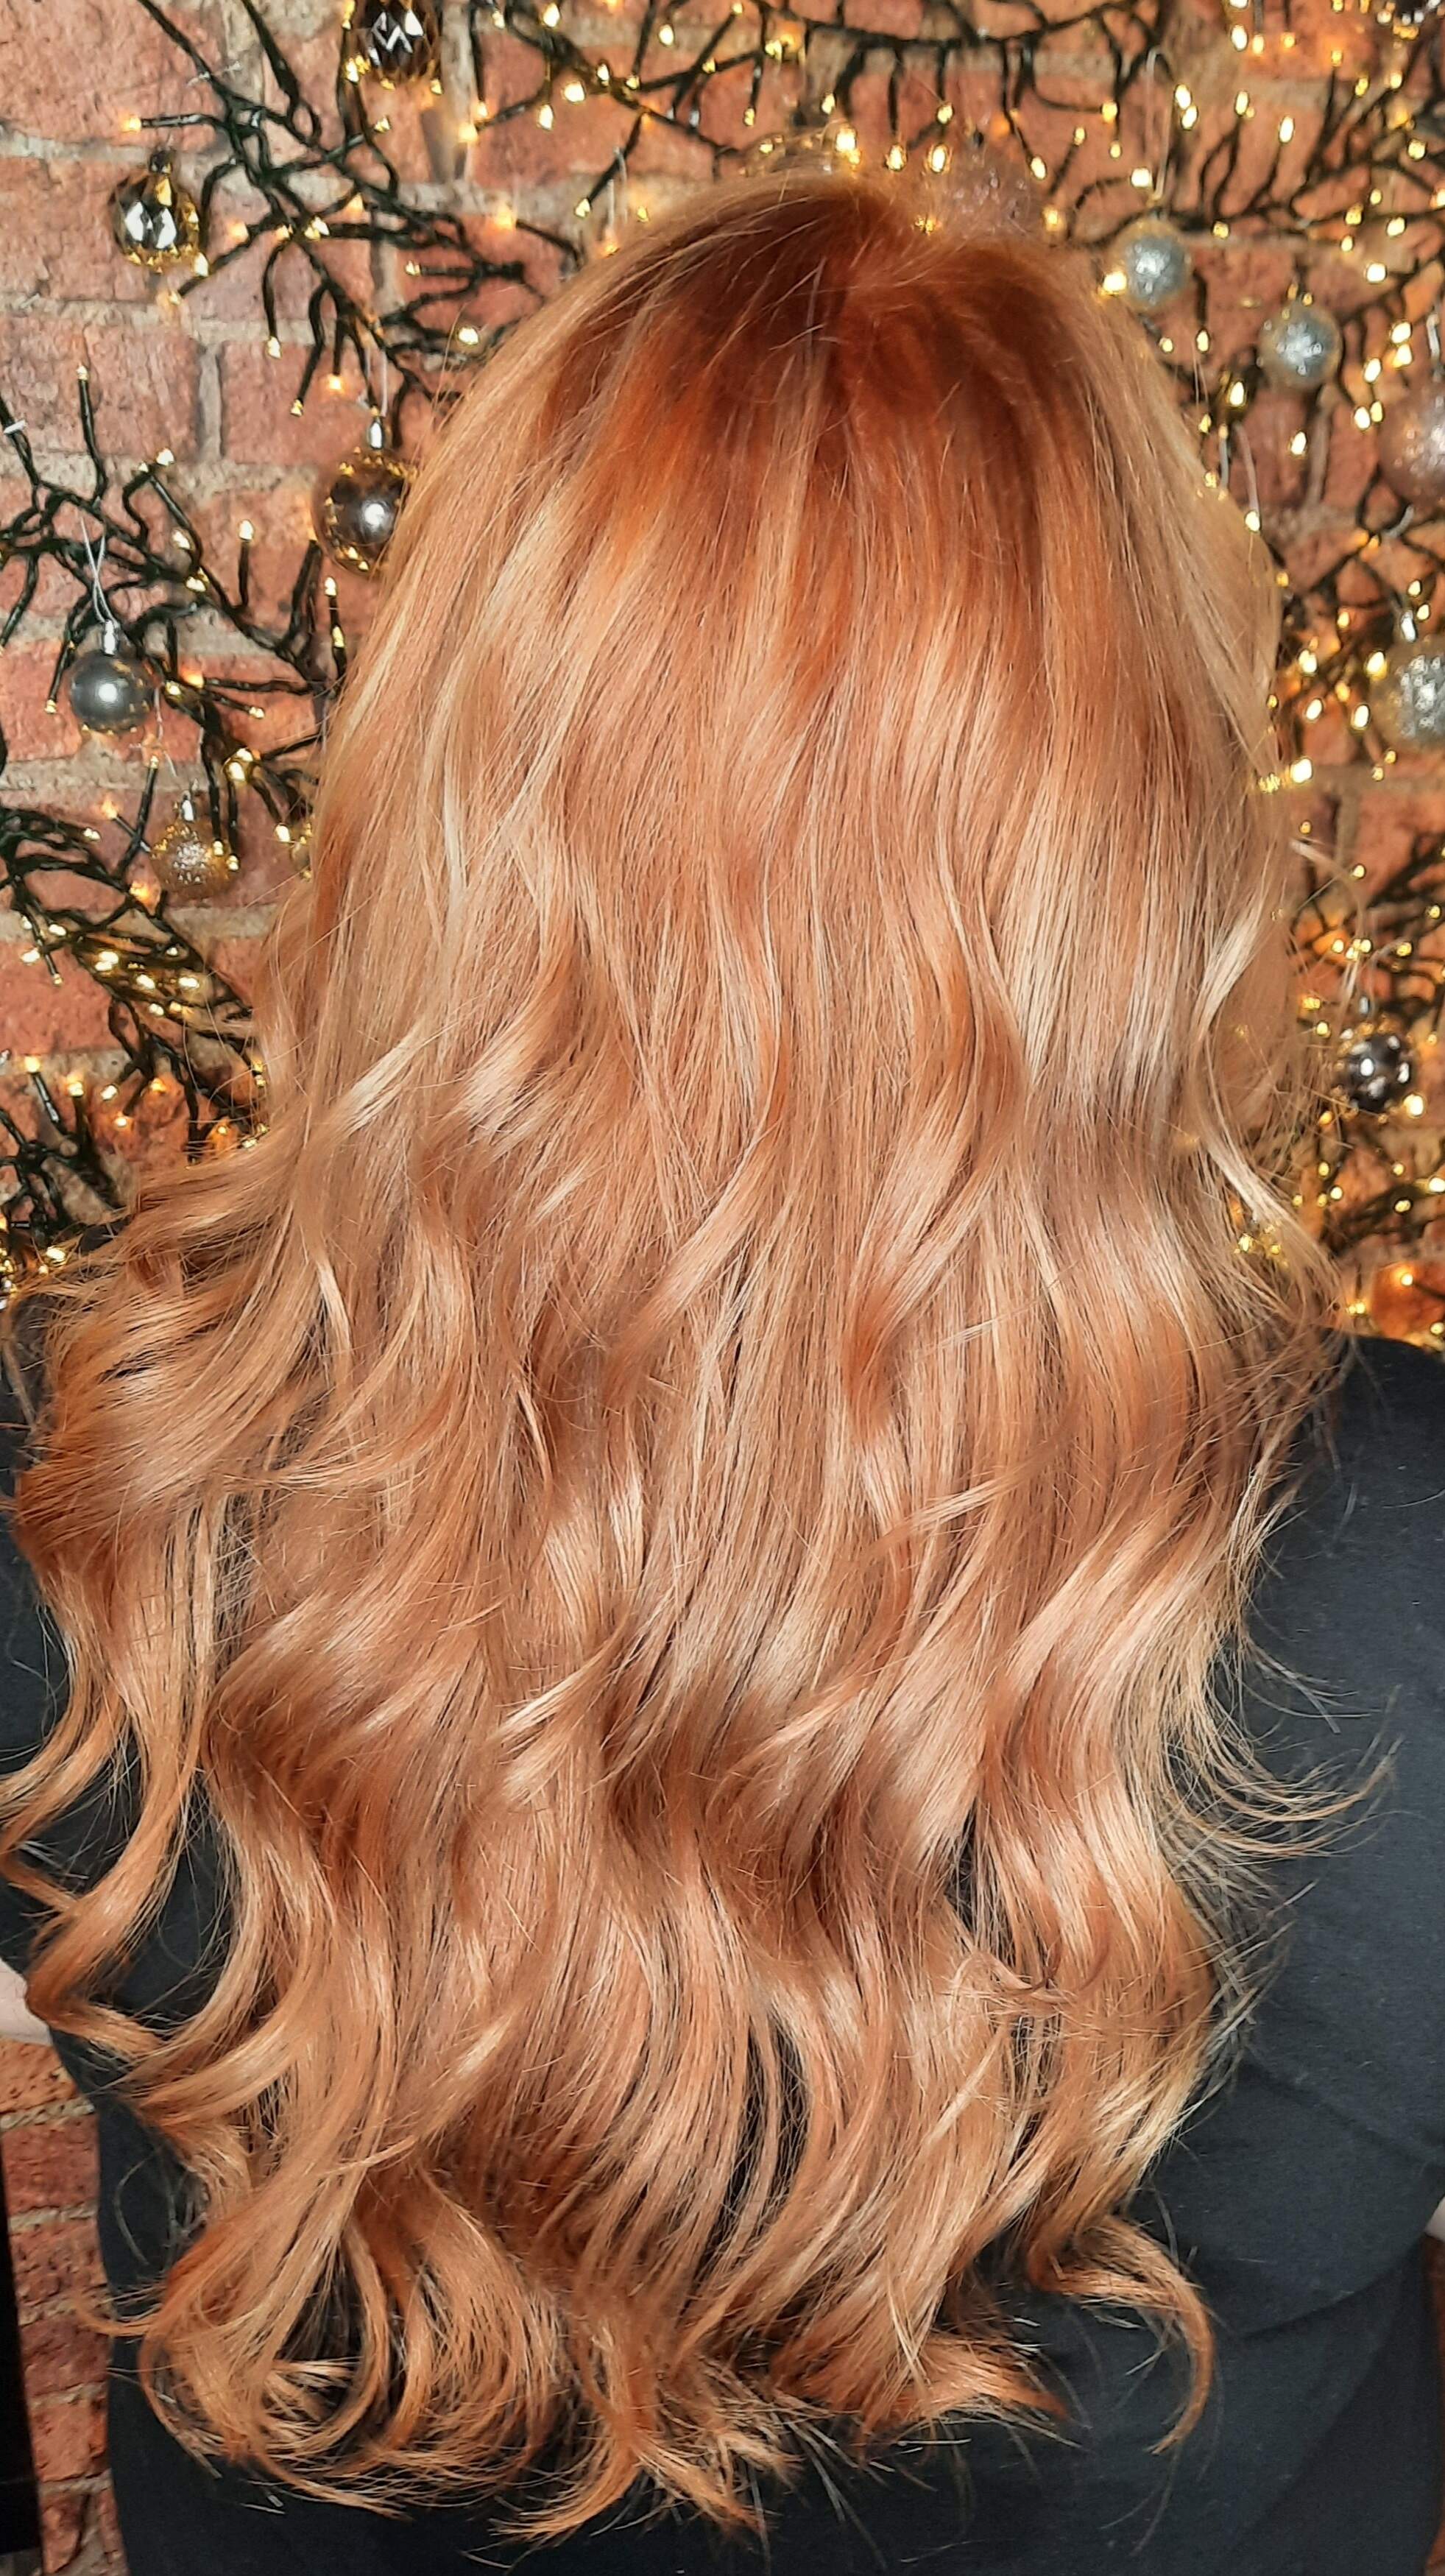 Using Copper Blonde all over with Baby Lights of Blonde to give definition